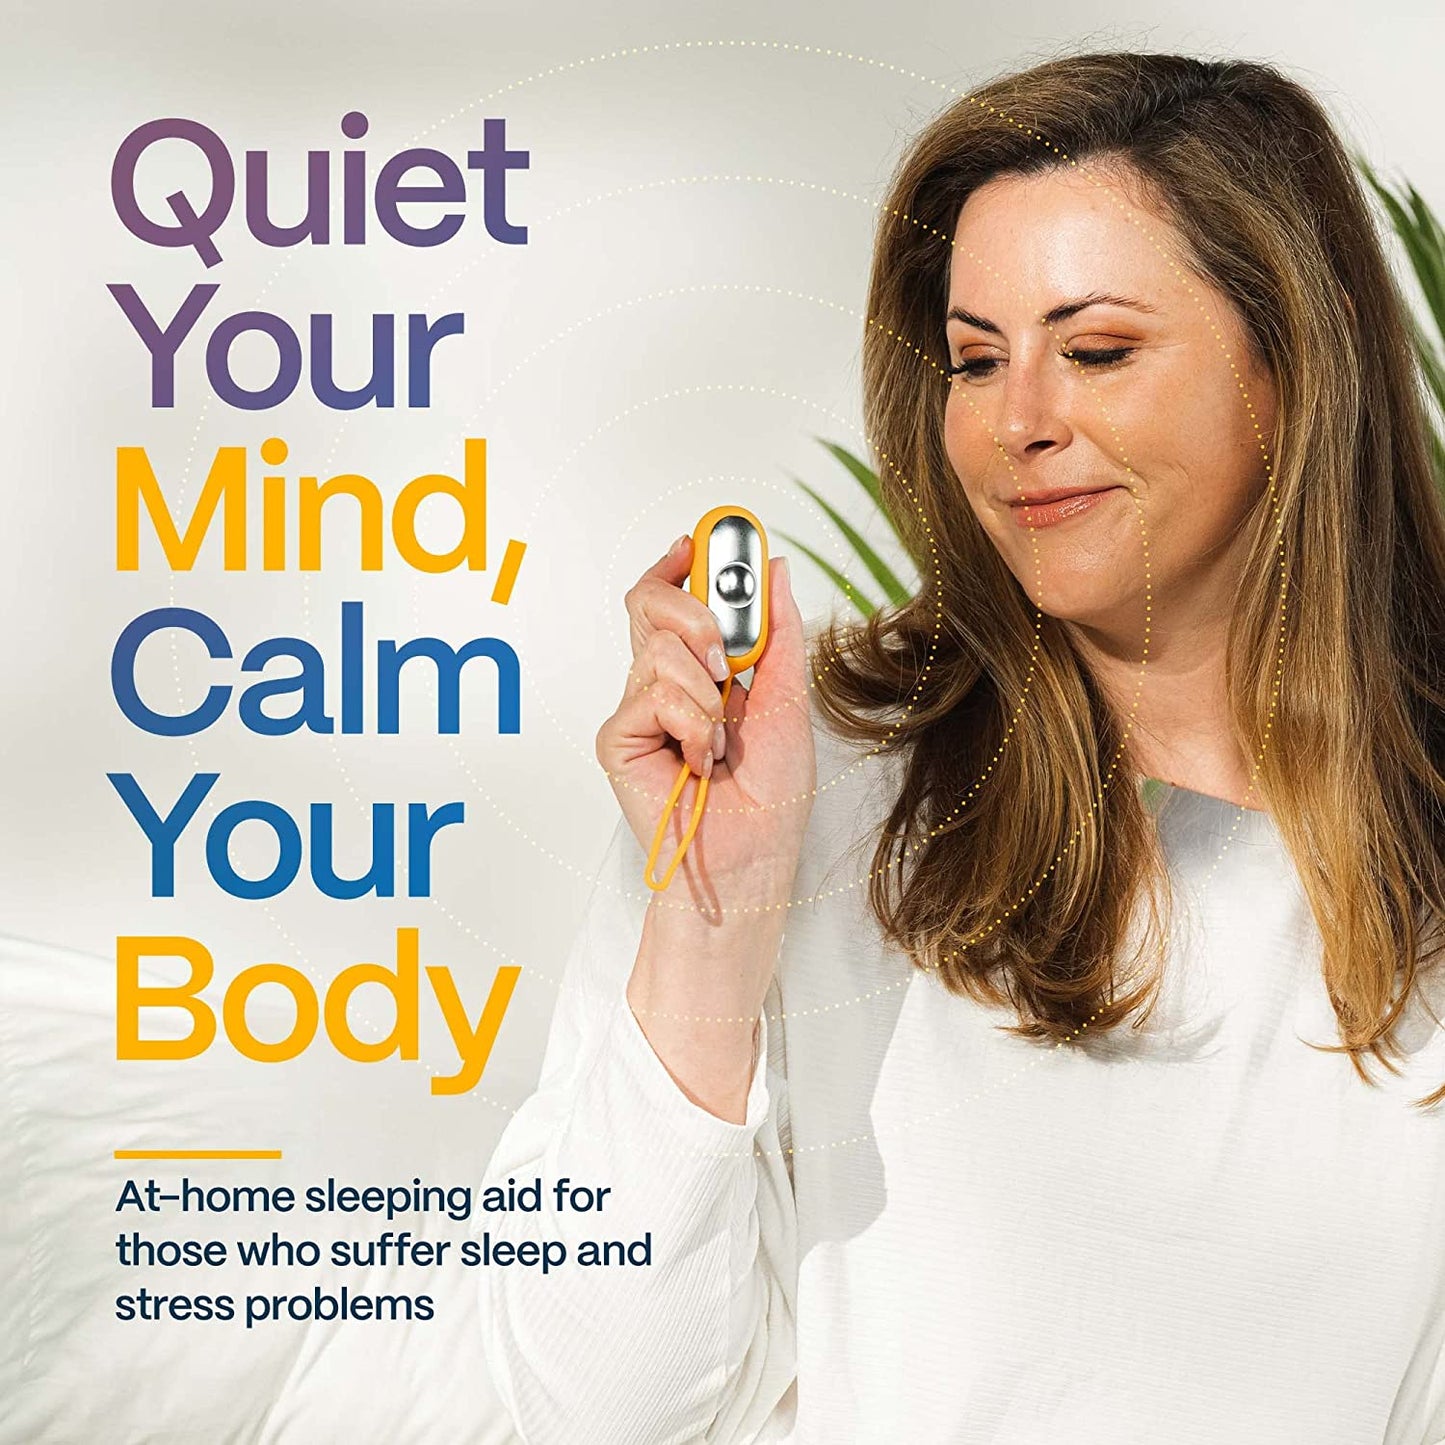 Fab Chill Signal™ Device (Anxiety Reliever & Sleep Aid)